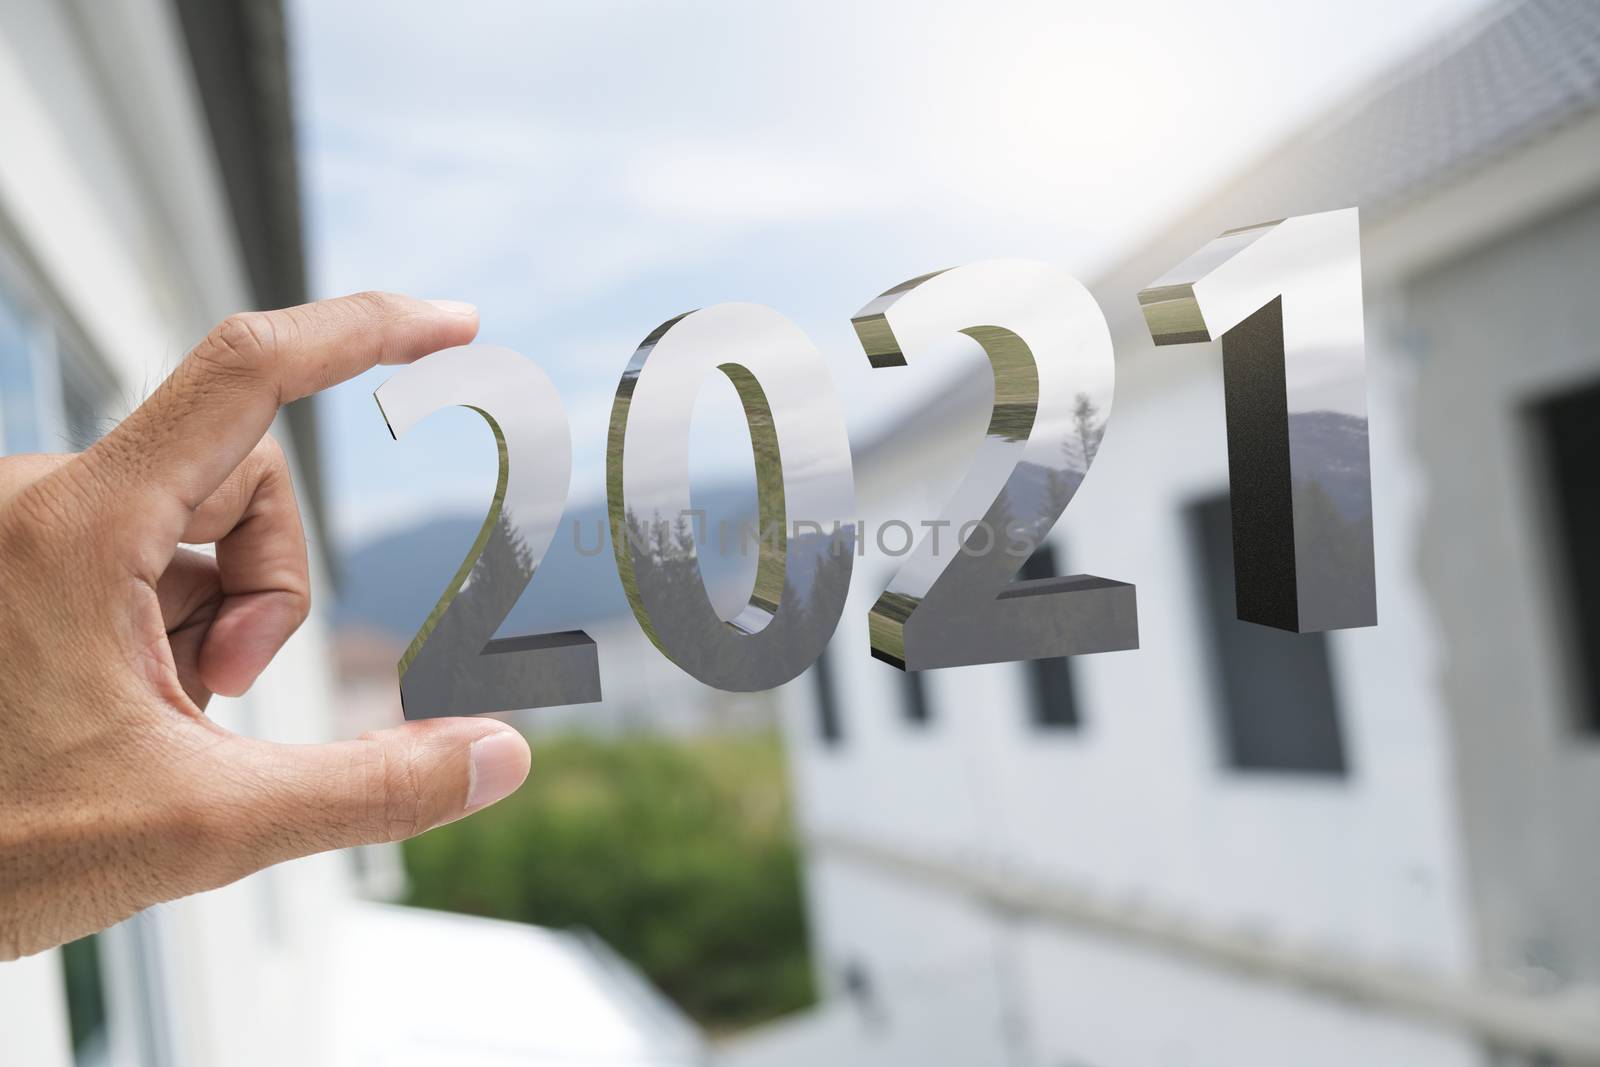 People man hand holding numbers 2021 Metaphor In the new year 2021 festival With open window To get To success In the business world Count down change 2020 to 2021 year